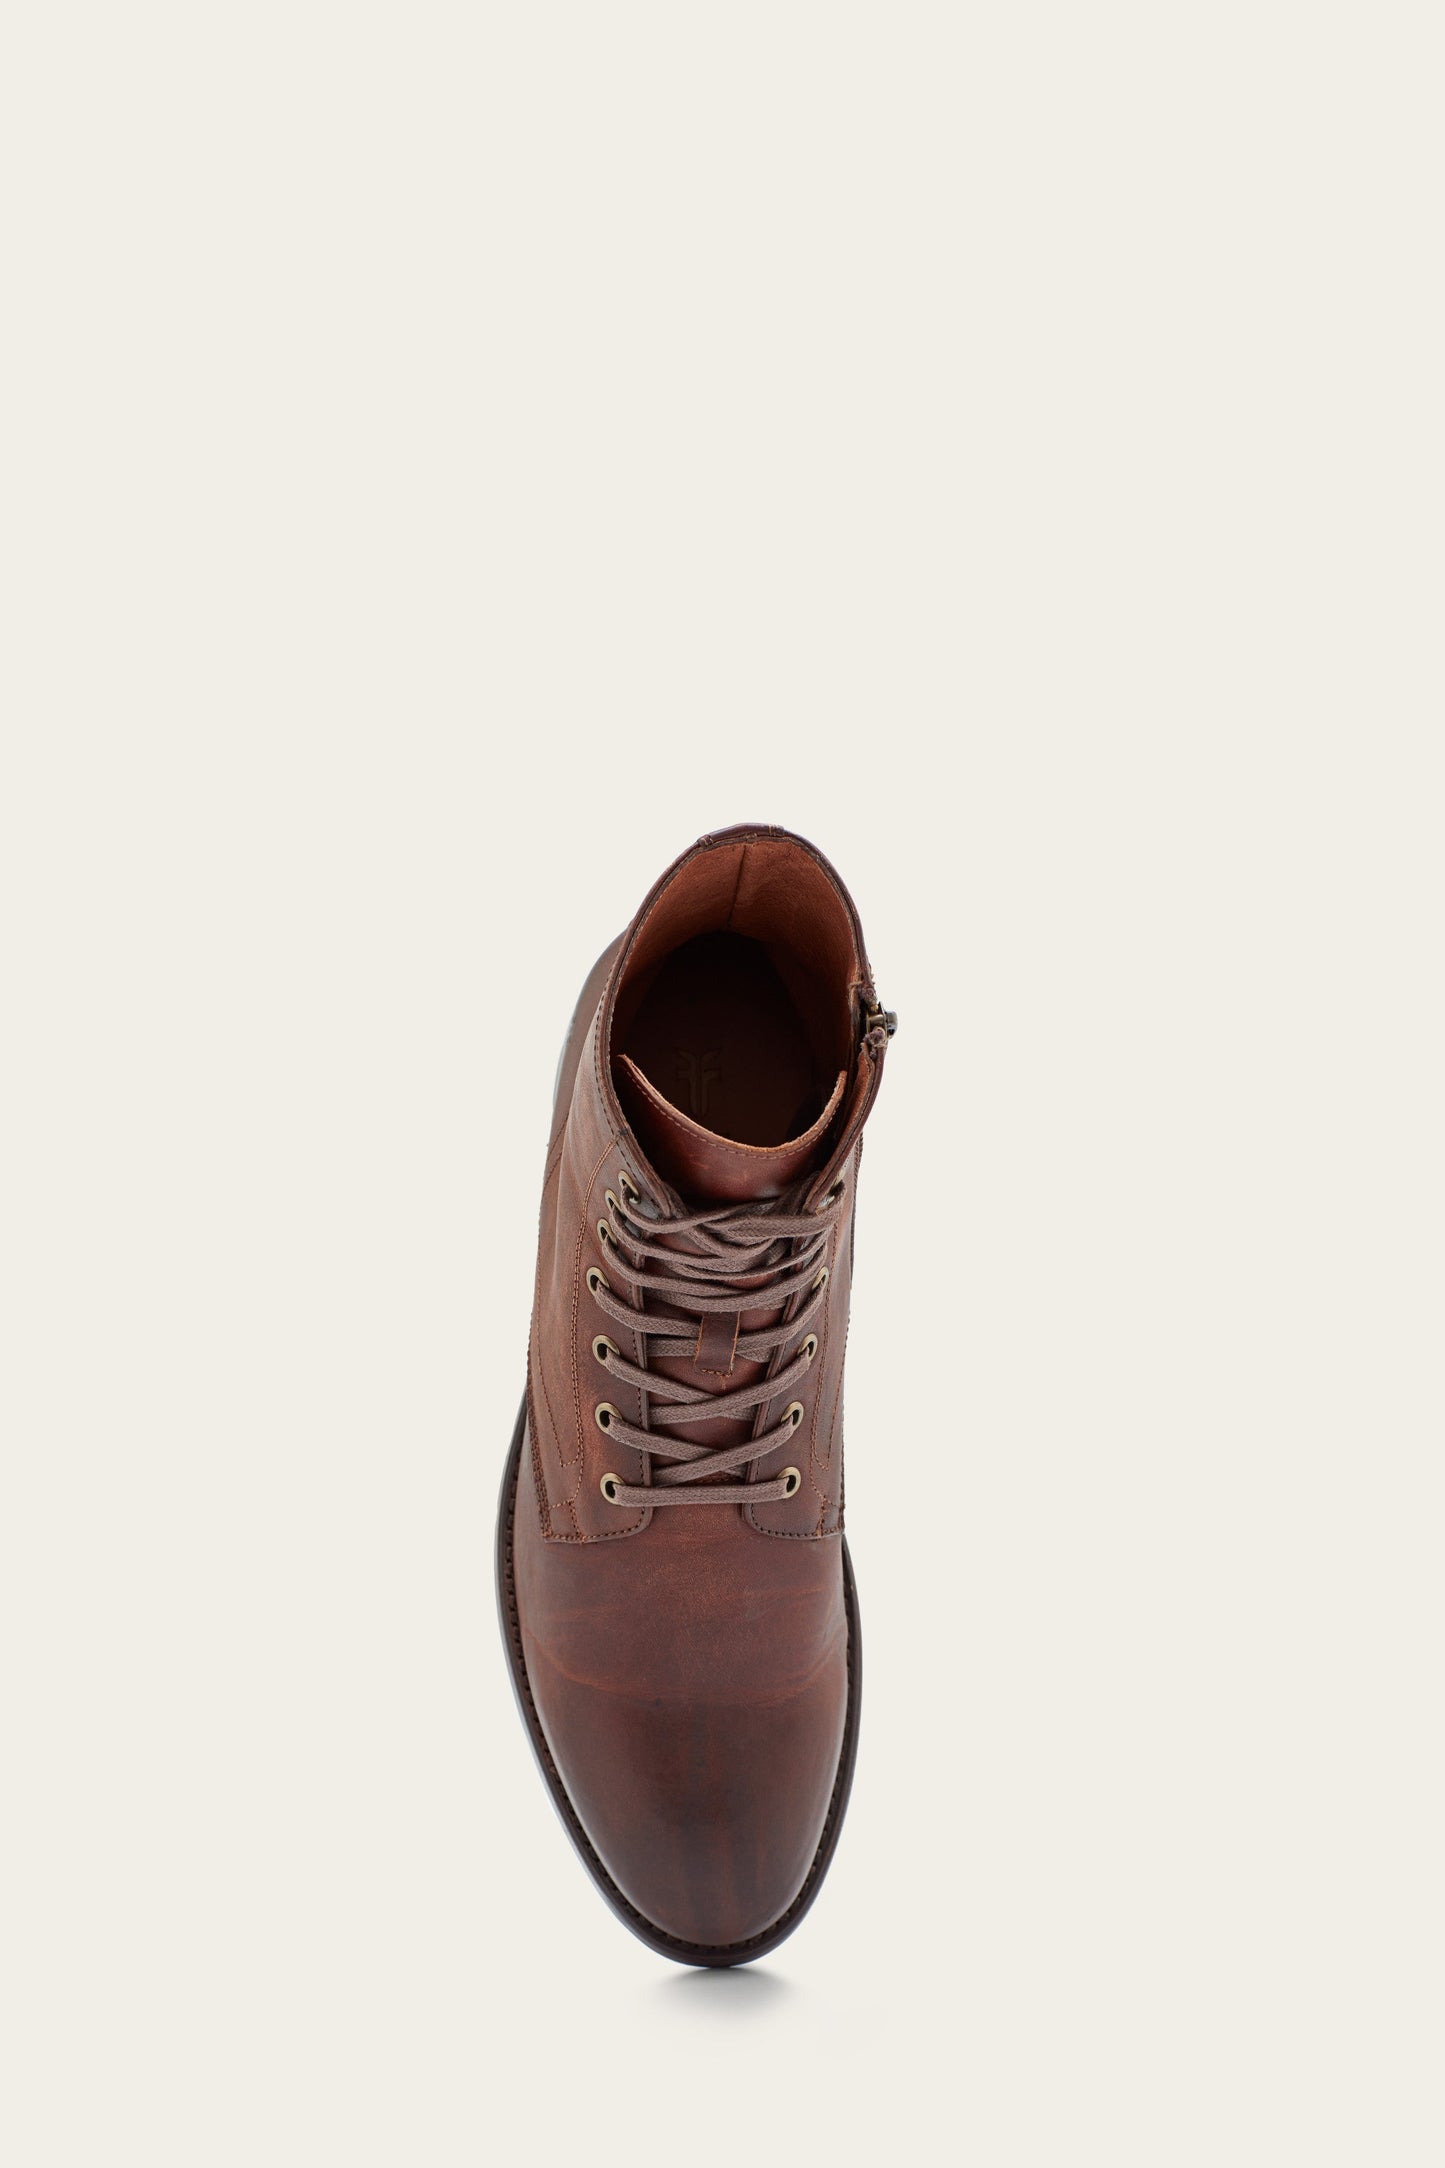 Bowery Lace Up - Cognac - Top Down